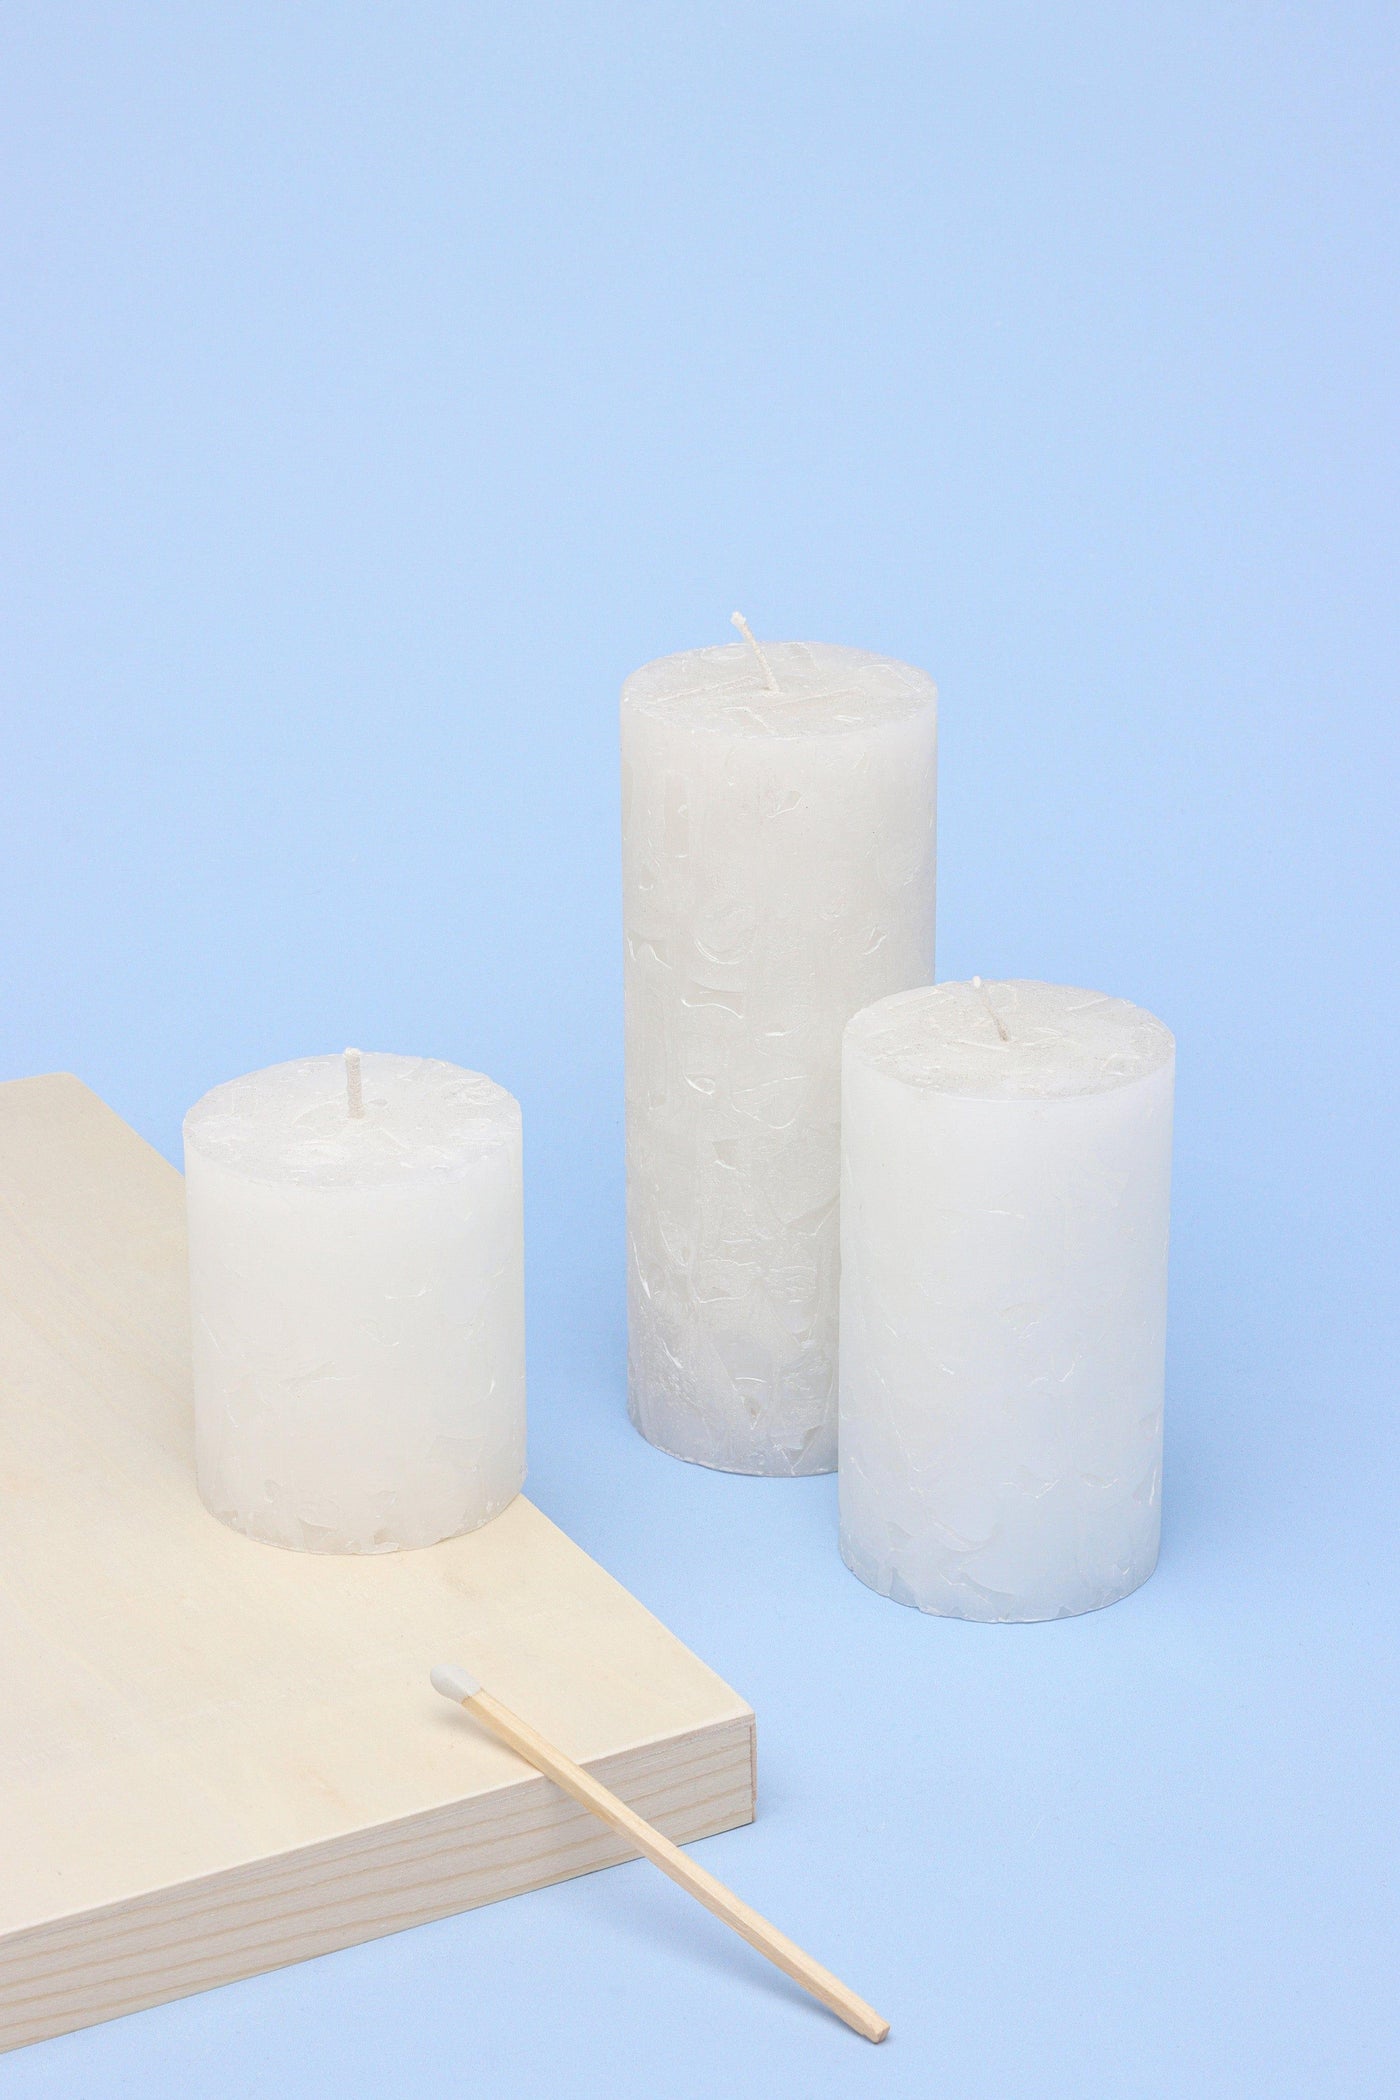 G Decor Candles & Candle Holders Set of Three Adeline White Pearl Textured Pillar Candles